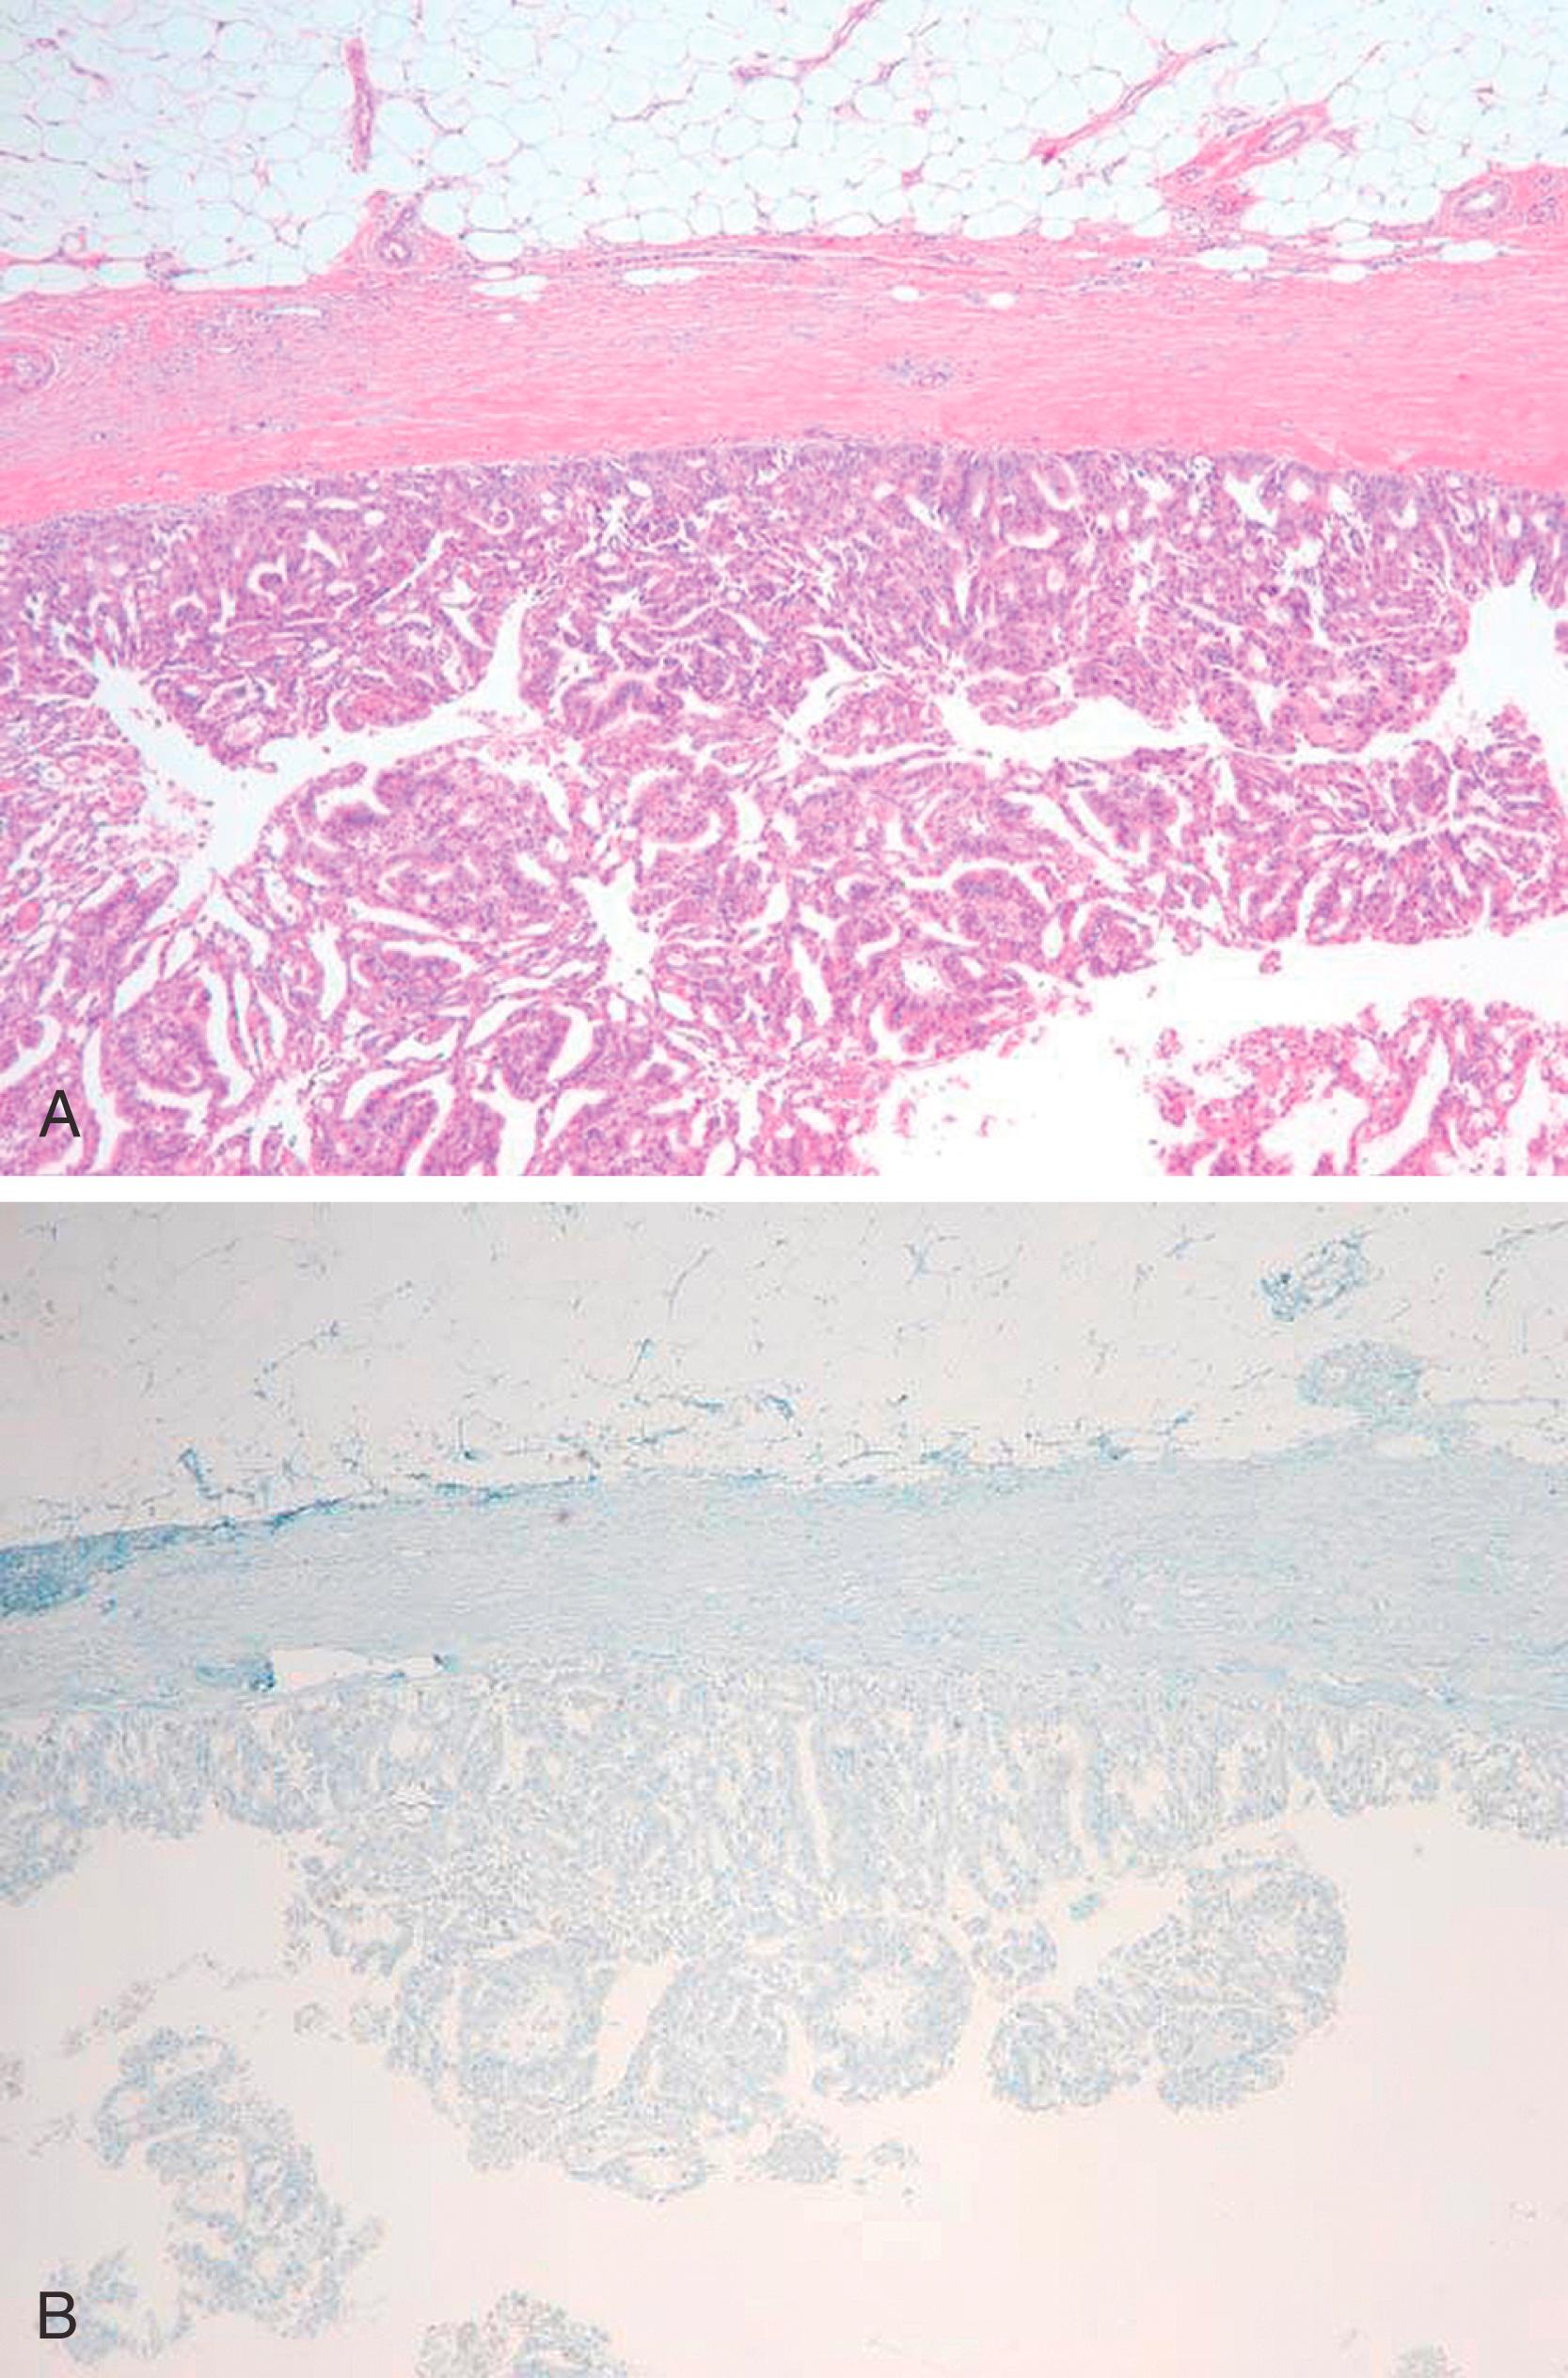 Fig. 19.15, An intracystic (encapsulated) papillary carcinoma (A), with lack of p63 staining at the periphery of the lesion (B).